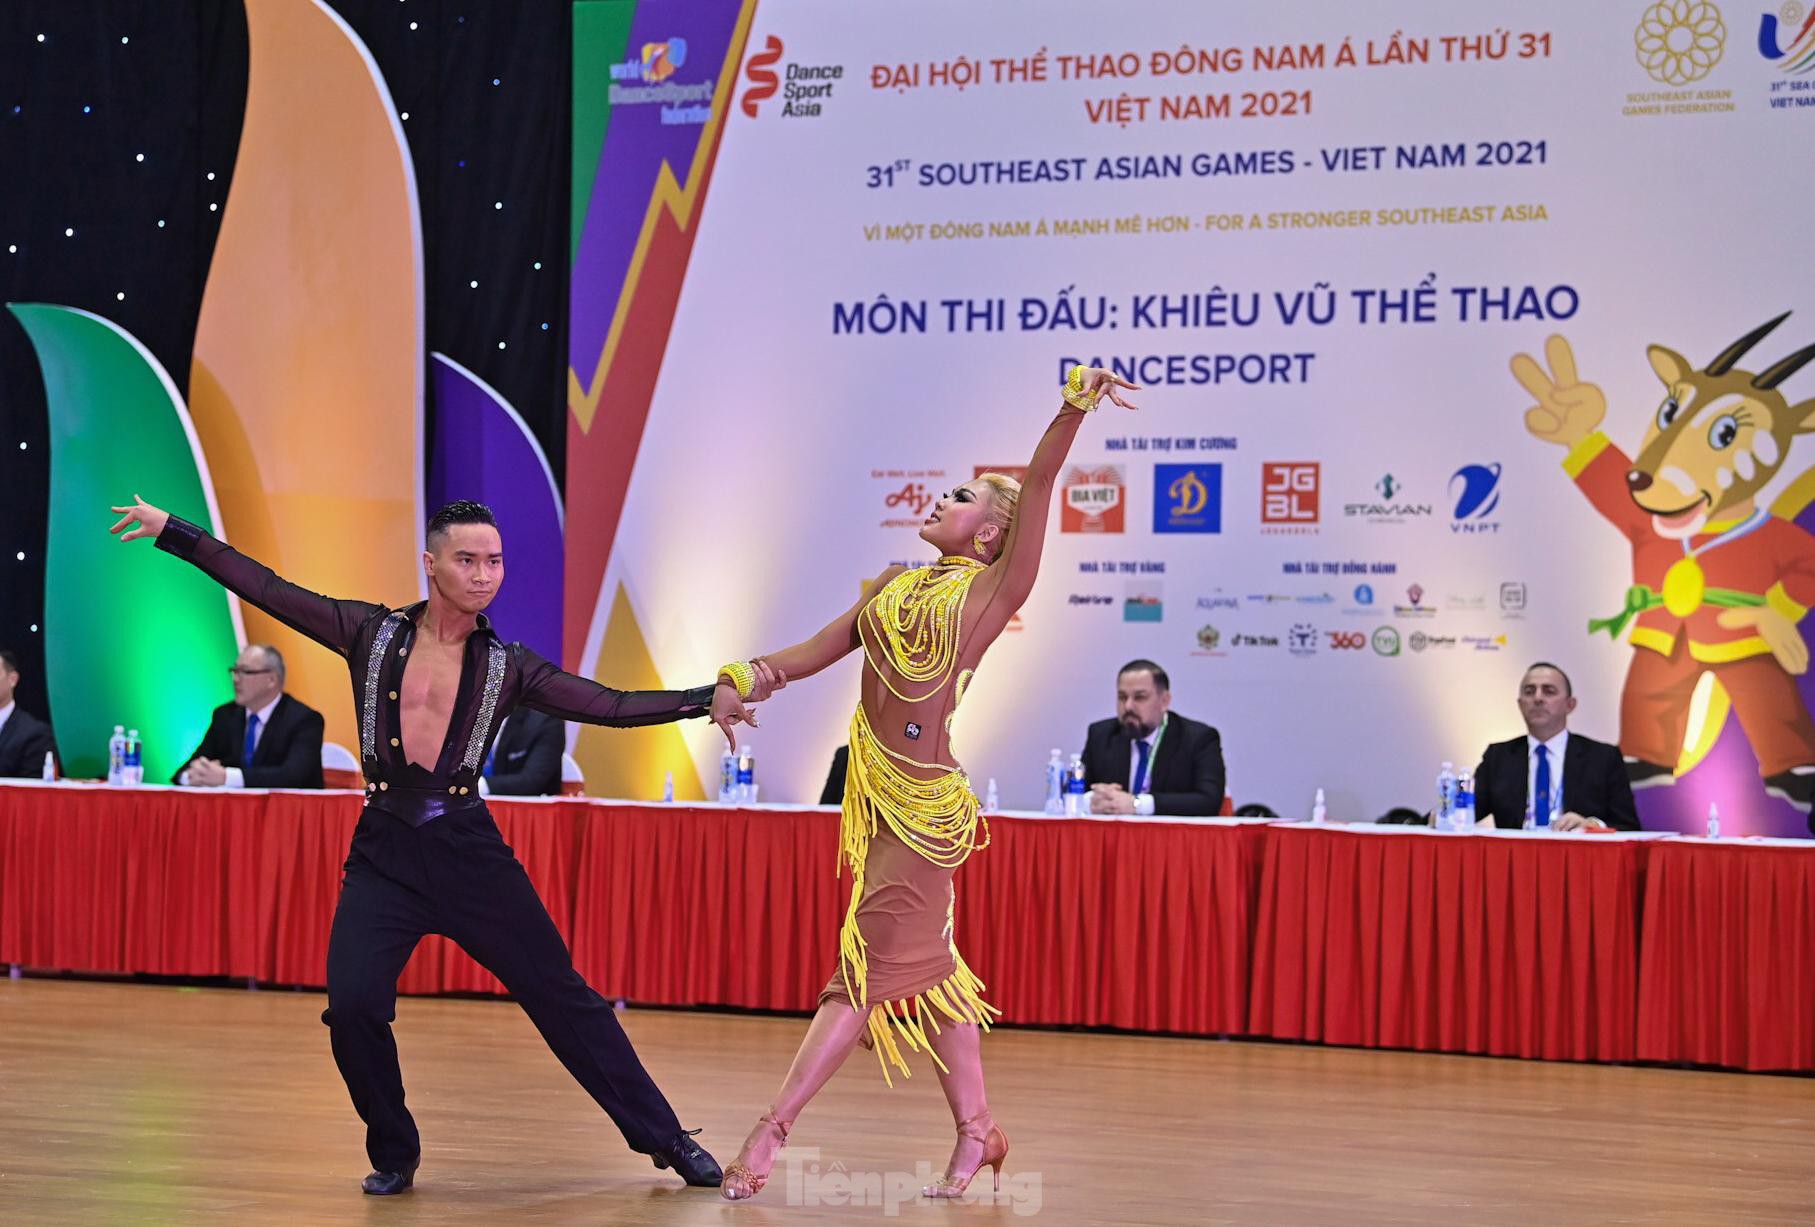 Watch the mesmerizing dance that helped Dancesport Vietnam win 5 gold medals at the 31st SEA Games - Photo 1.